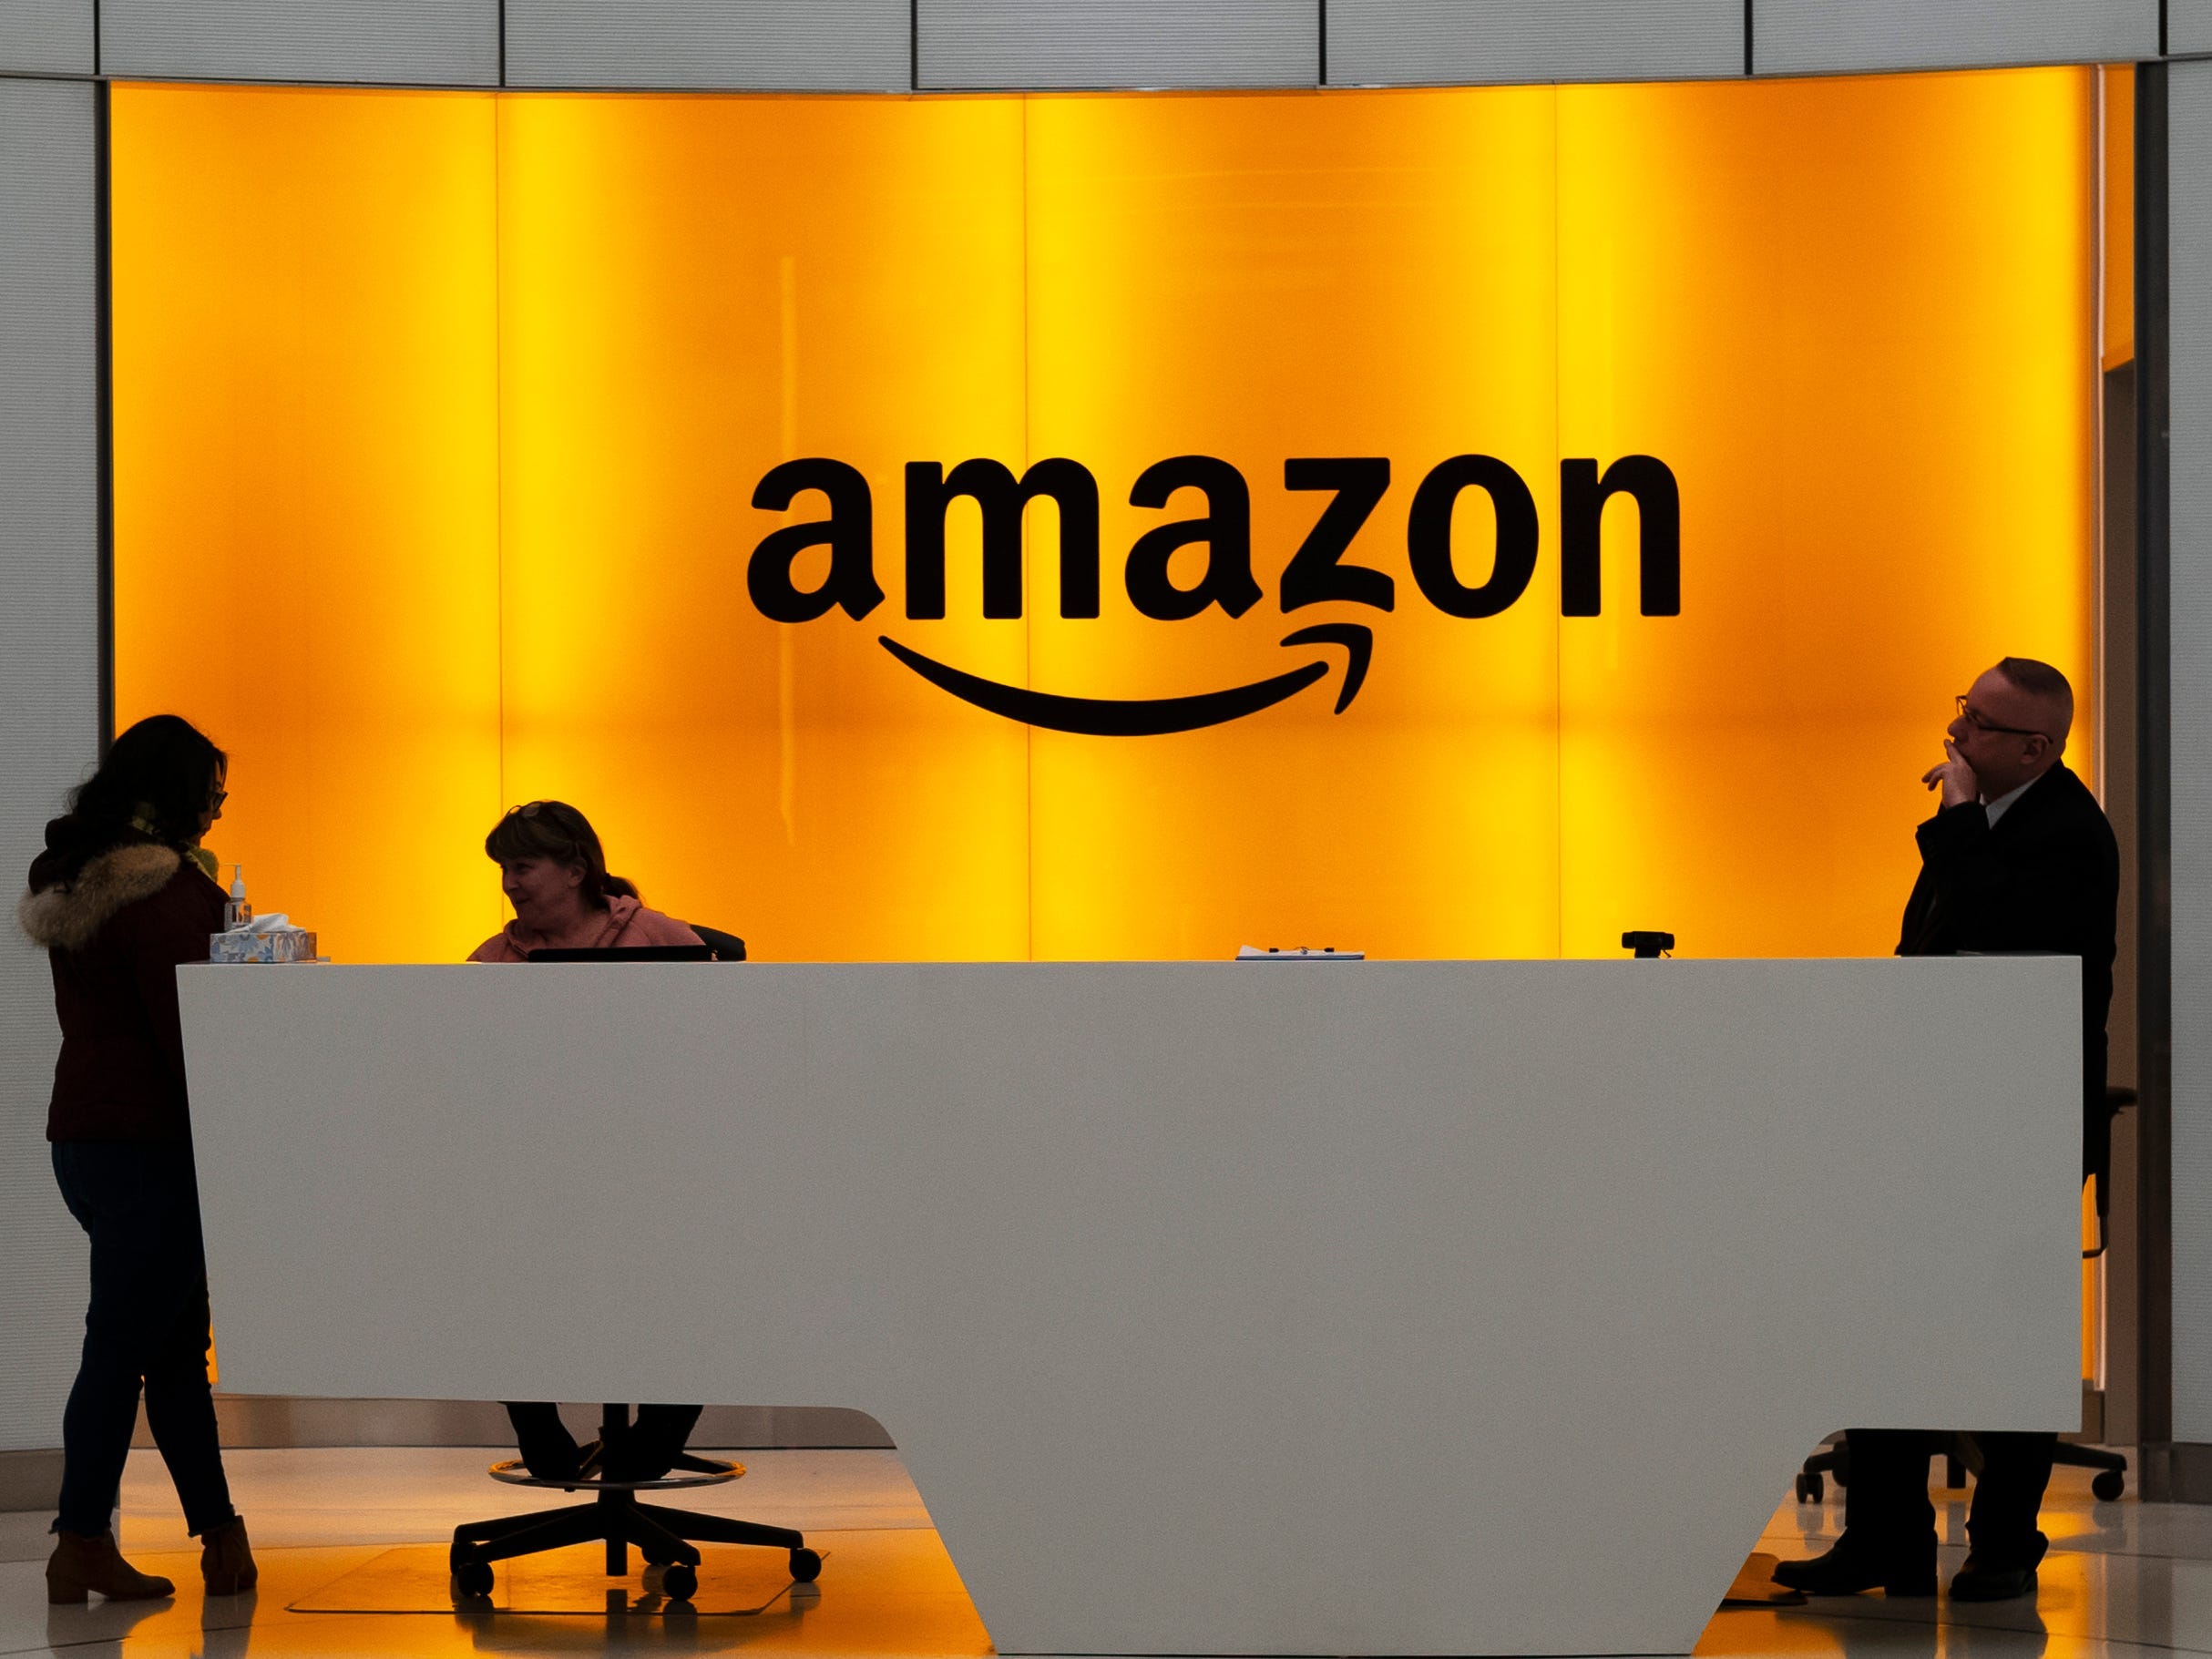 Amazon office front-desk staff stand in front of an orange sign with the Amazon smile logo